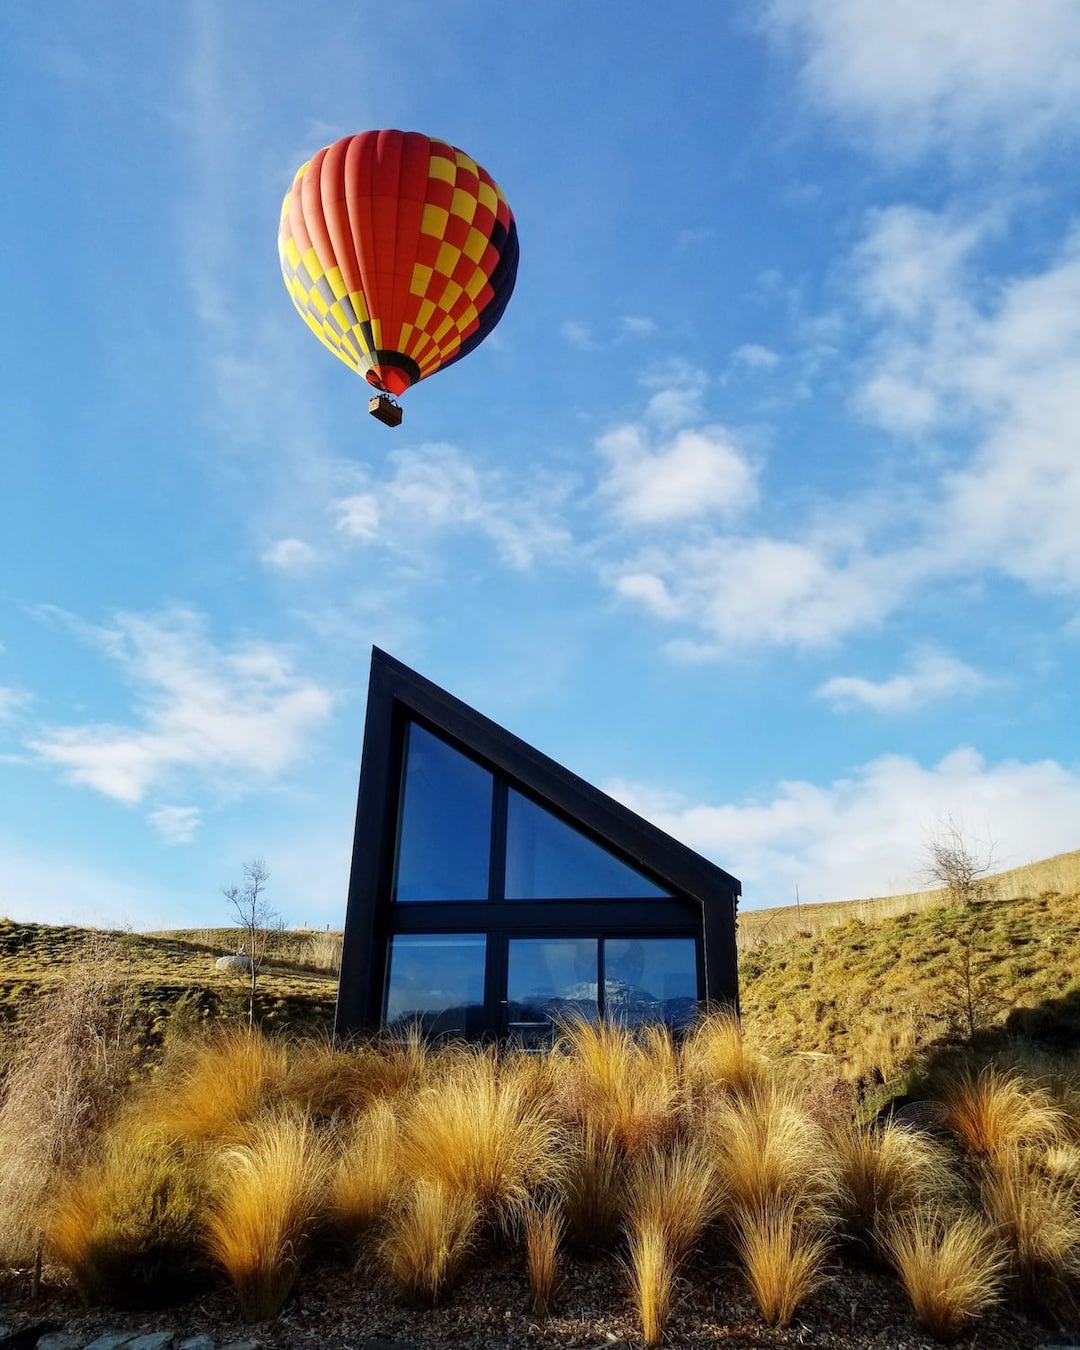 An angular home with a hot air balloon floating above it.